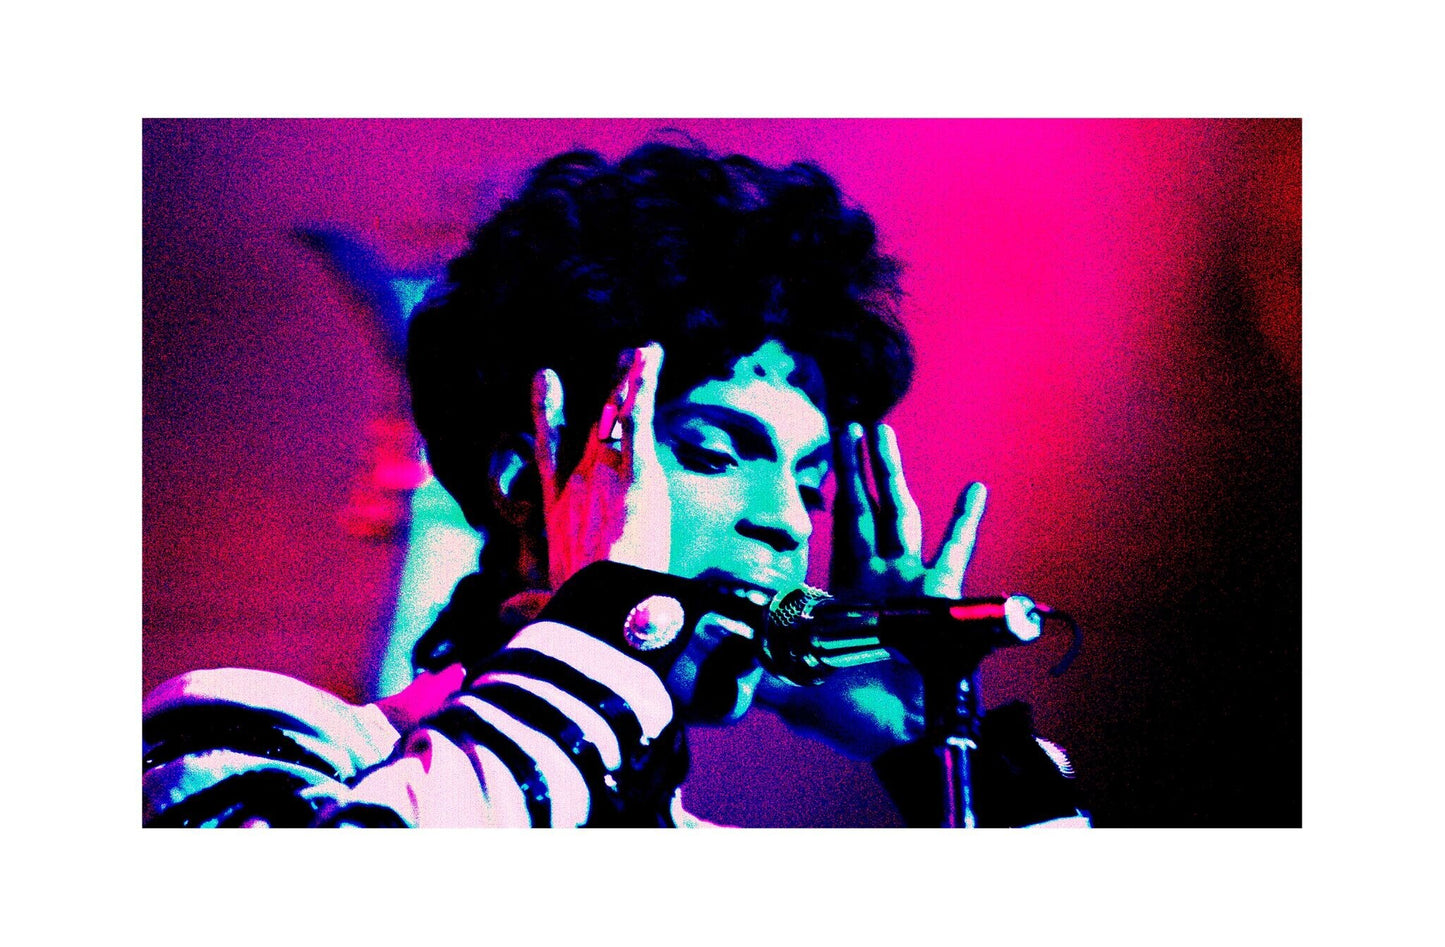 Prince - Singing Live with Psychedelic Lights, 1993 Print 2